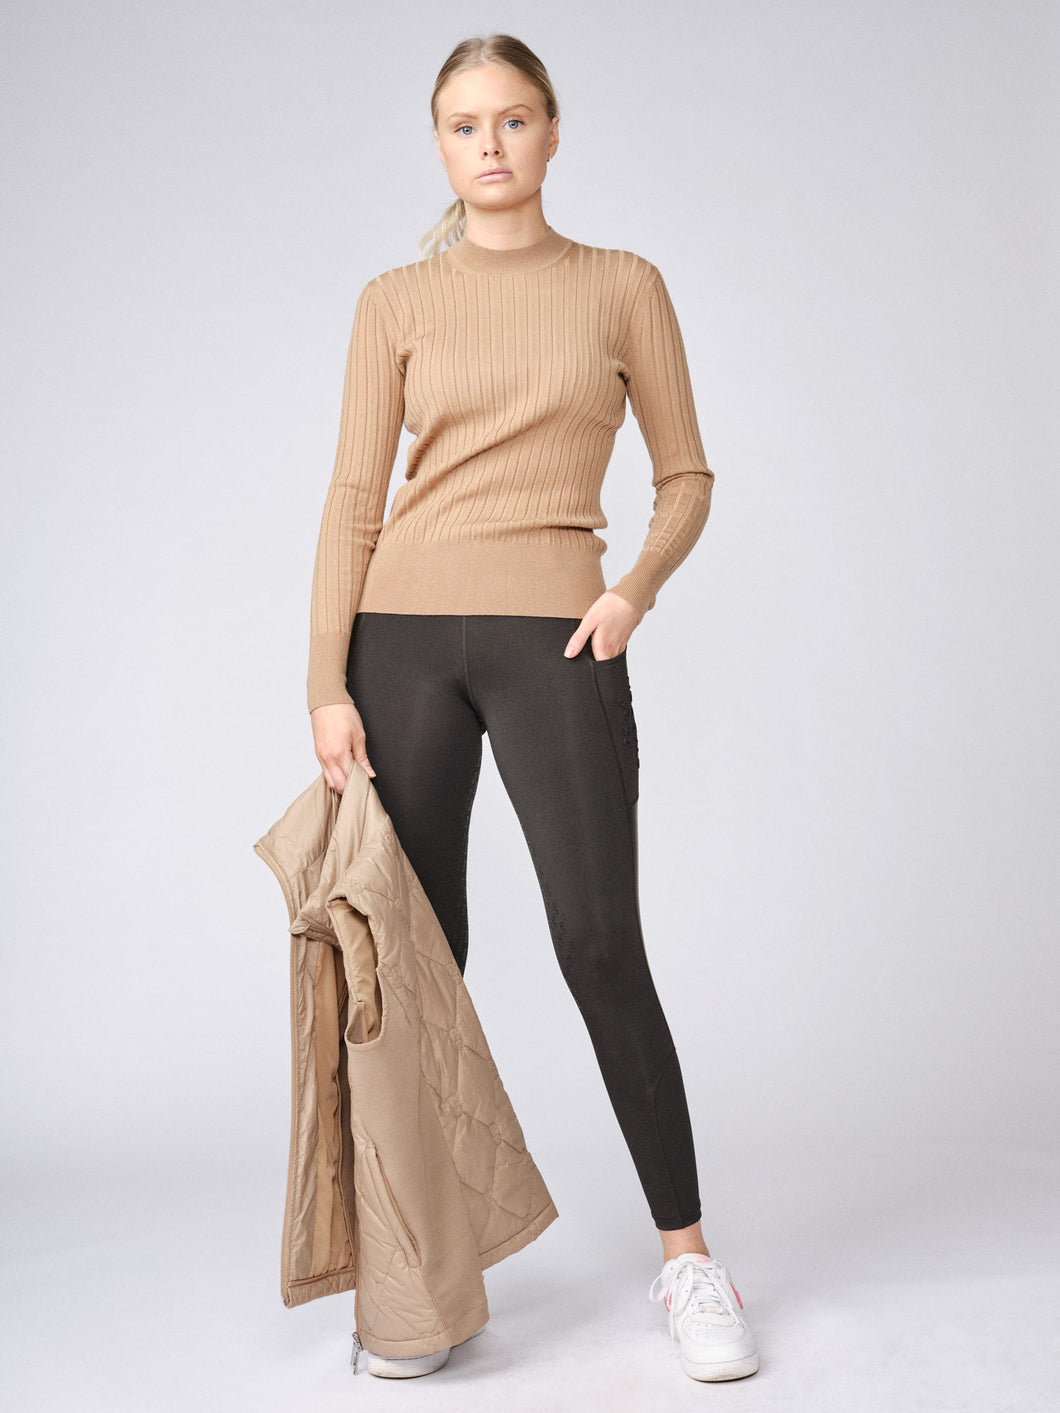 Long sleeve fine knit sweater in soft lyocell merino blend. The wide rib structure, together with the deep cuffs and hem, ensures a comfortable fit and stylish impression.